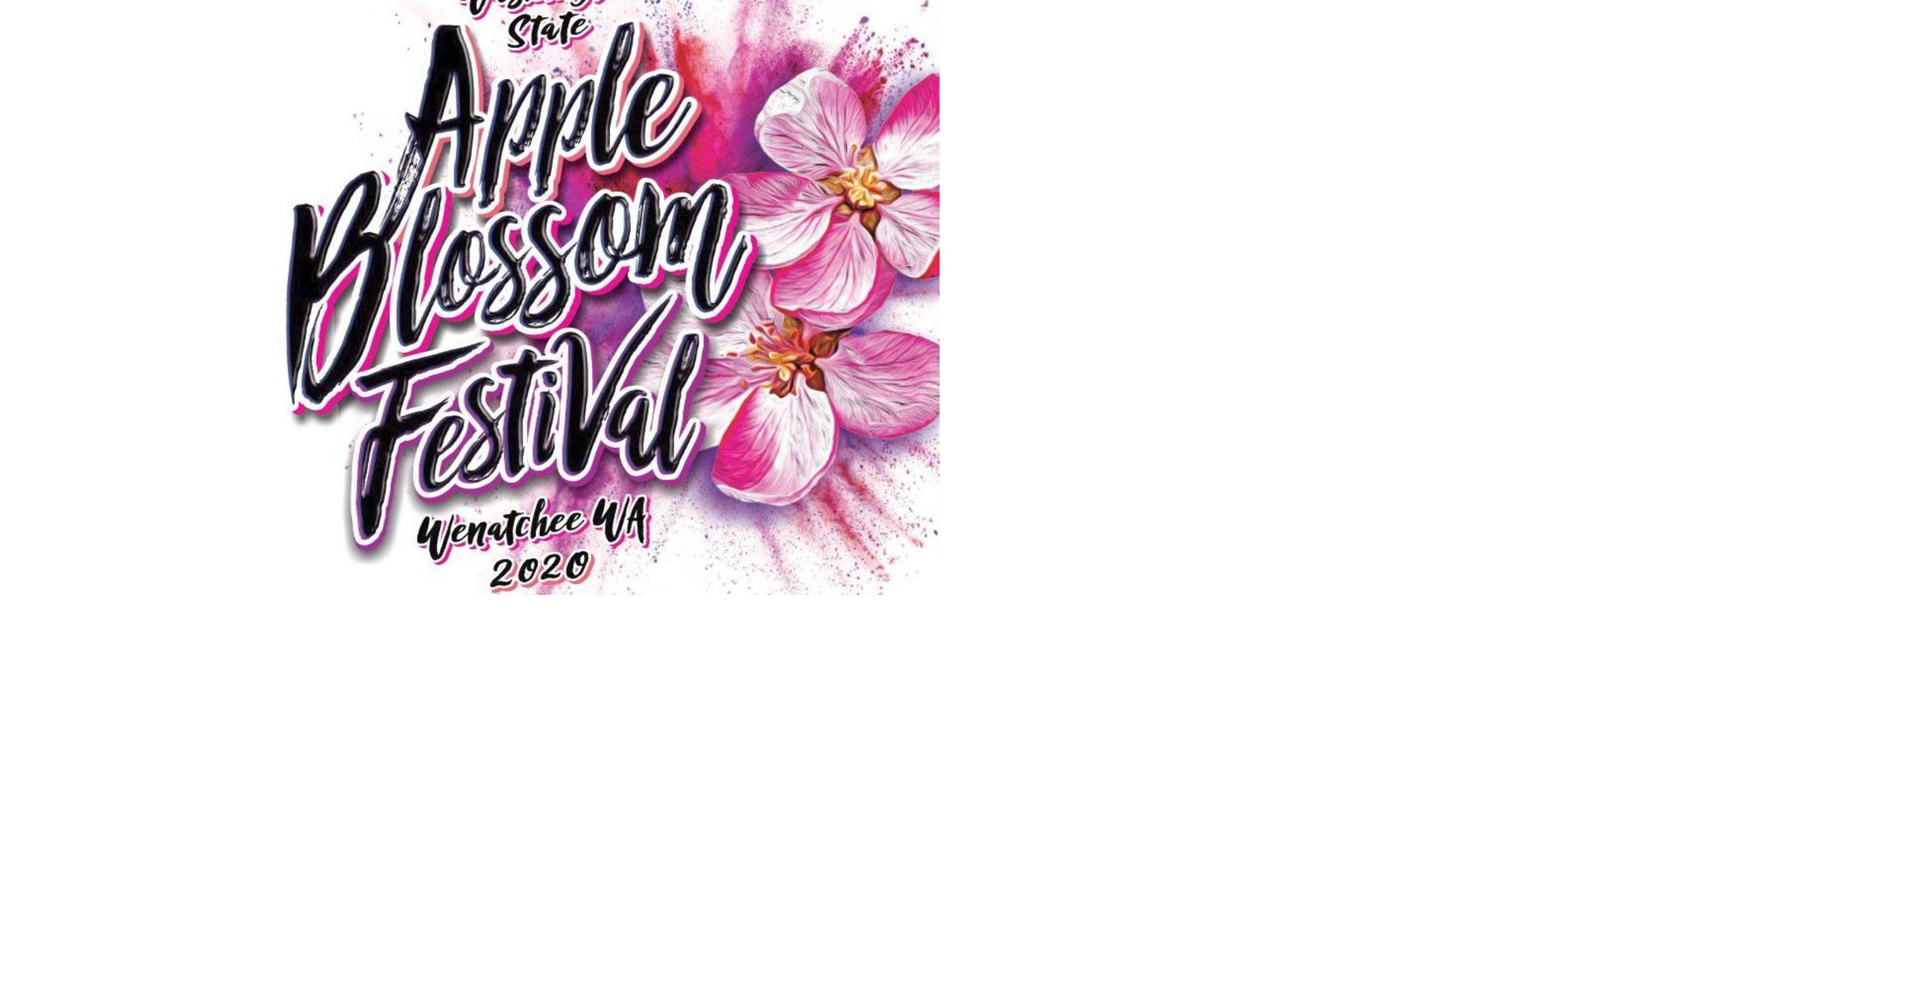 Apple Blossom Festival officially calls off this year’s celebration